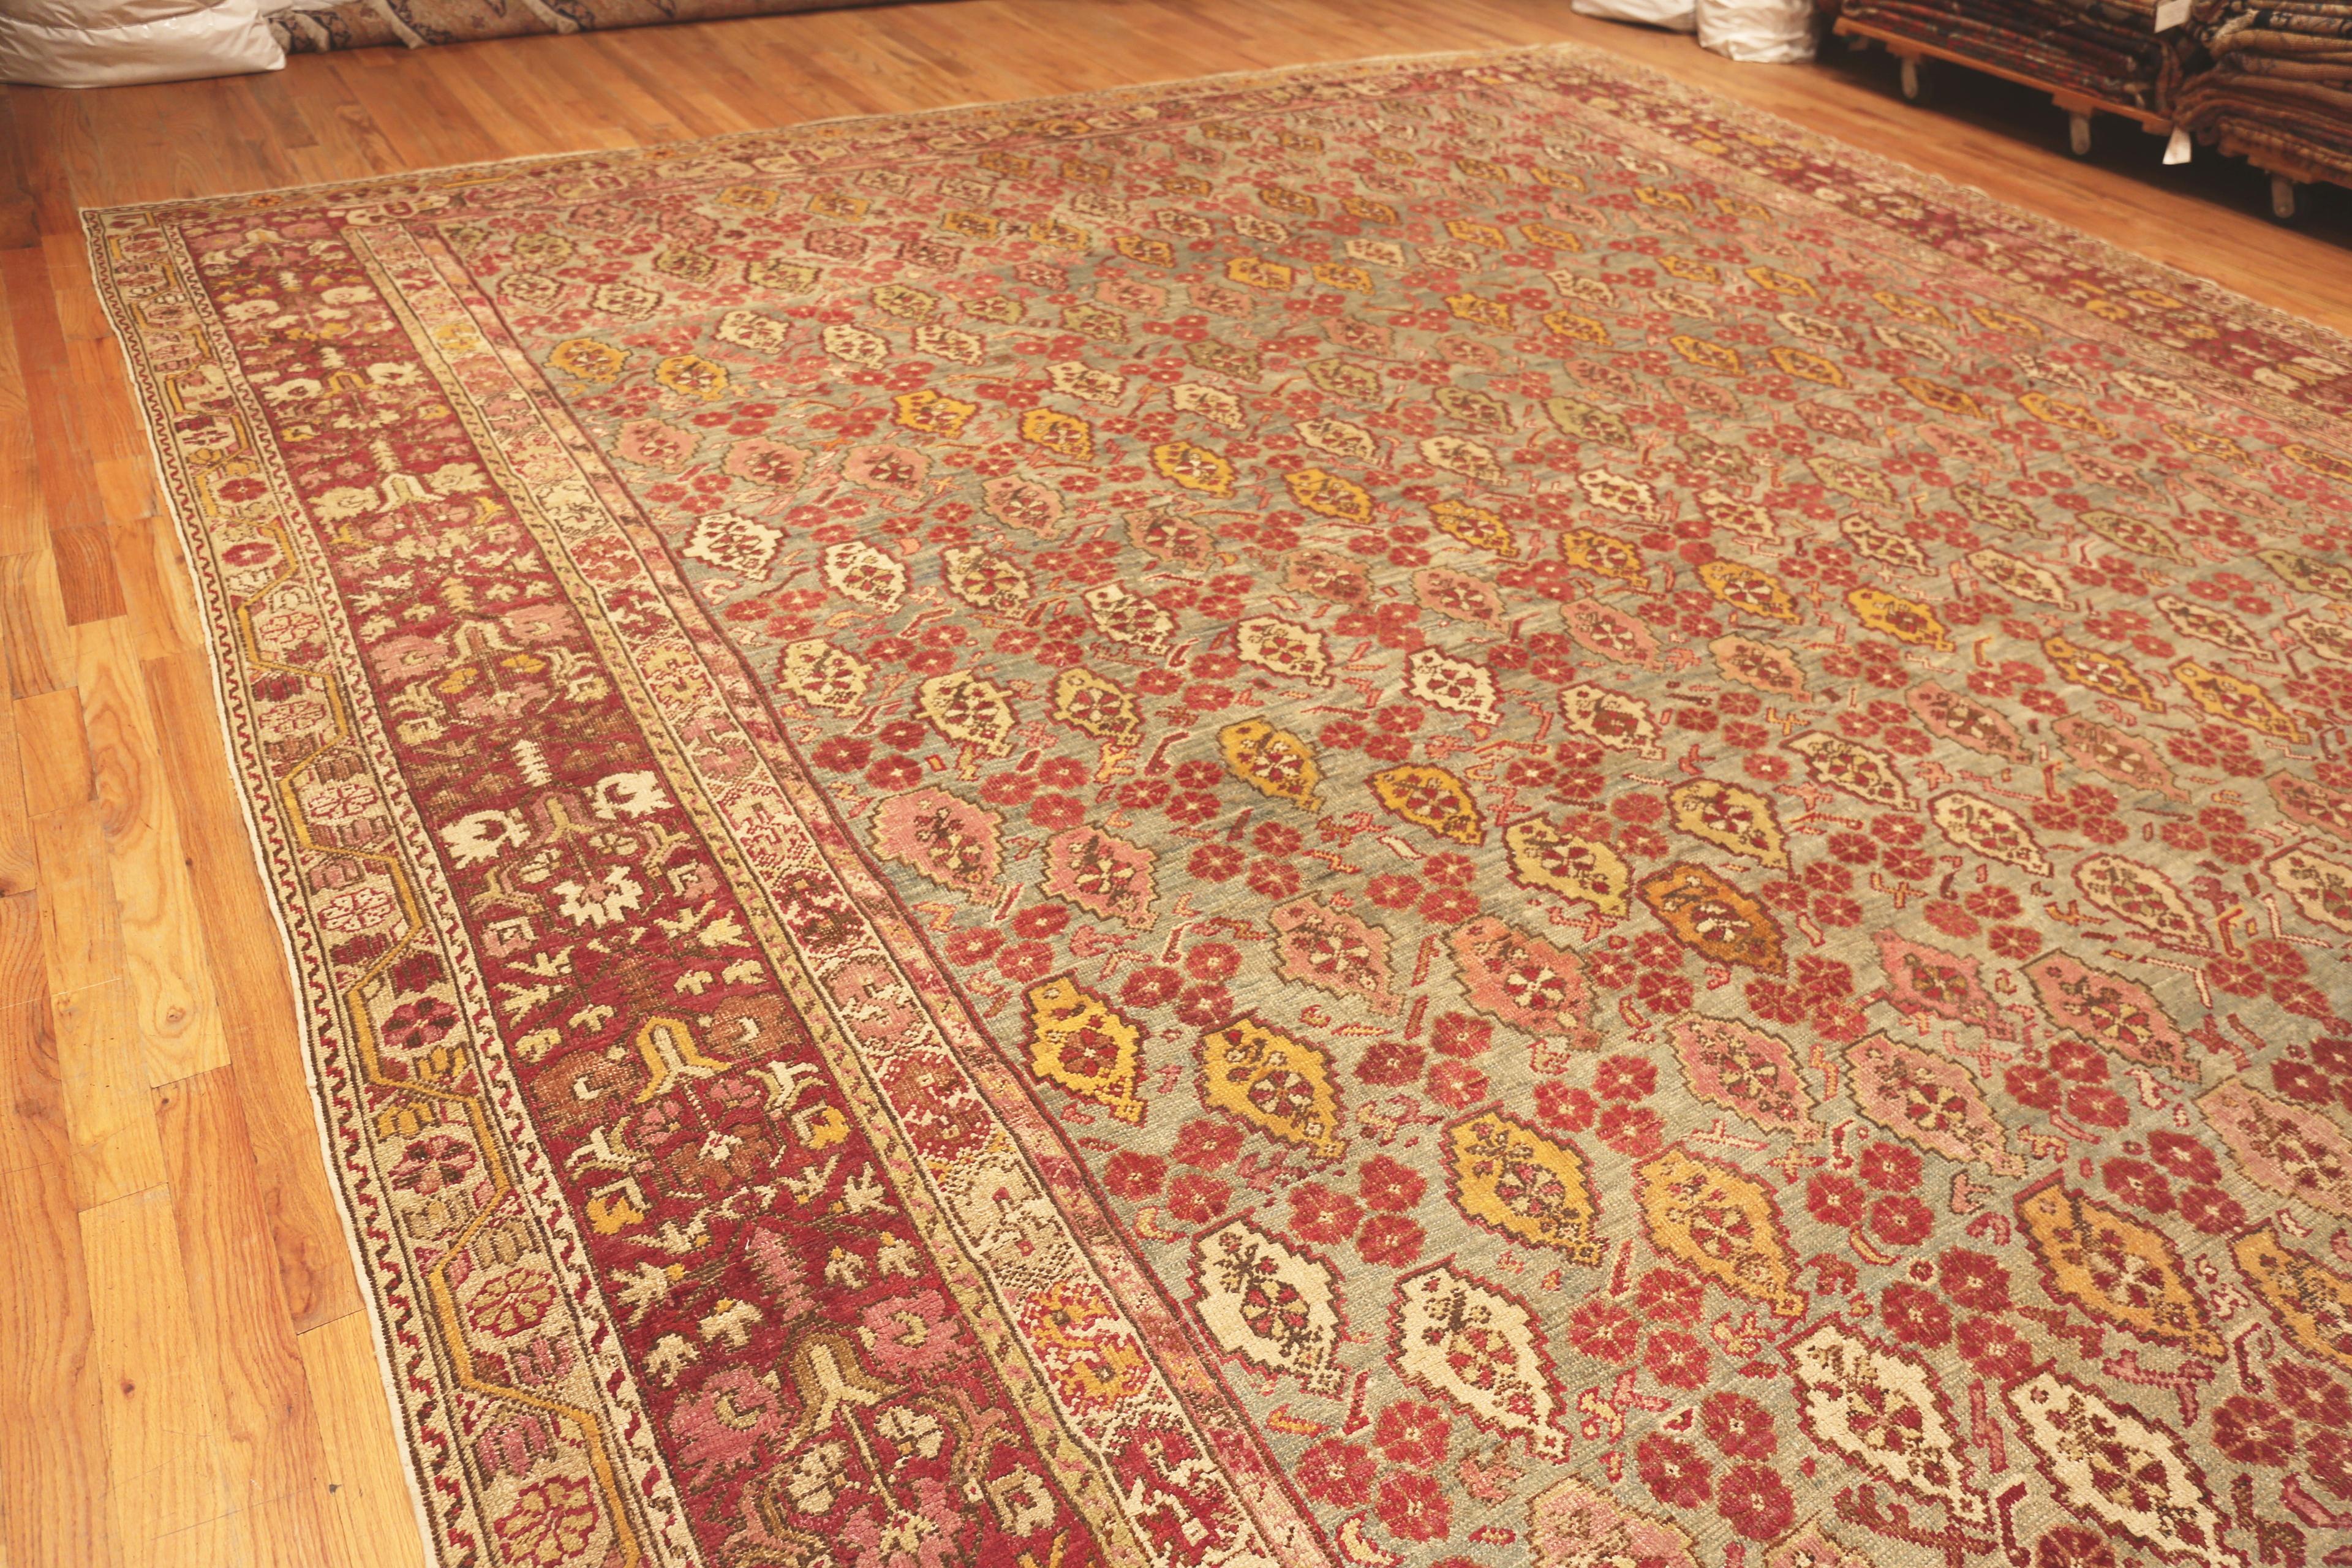 Large Antique Turkish Ghiordes Area Rug, Country Of Origin: Turkey, Circa date: 1880. Size: 15 ft 5 in x 17 ft 4 in (4.7 m x 5.28 m)